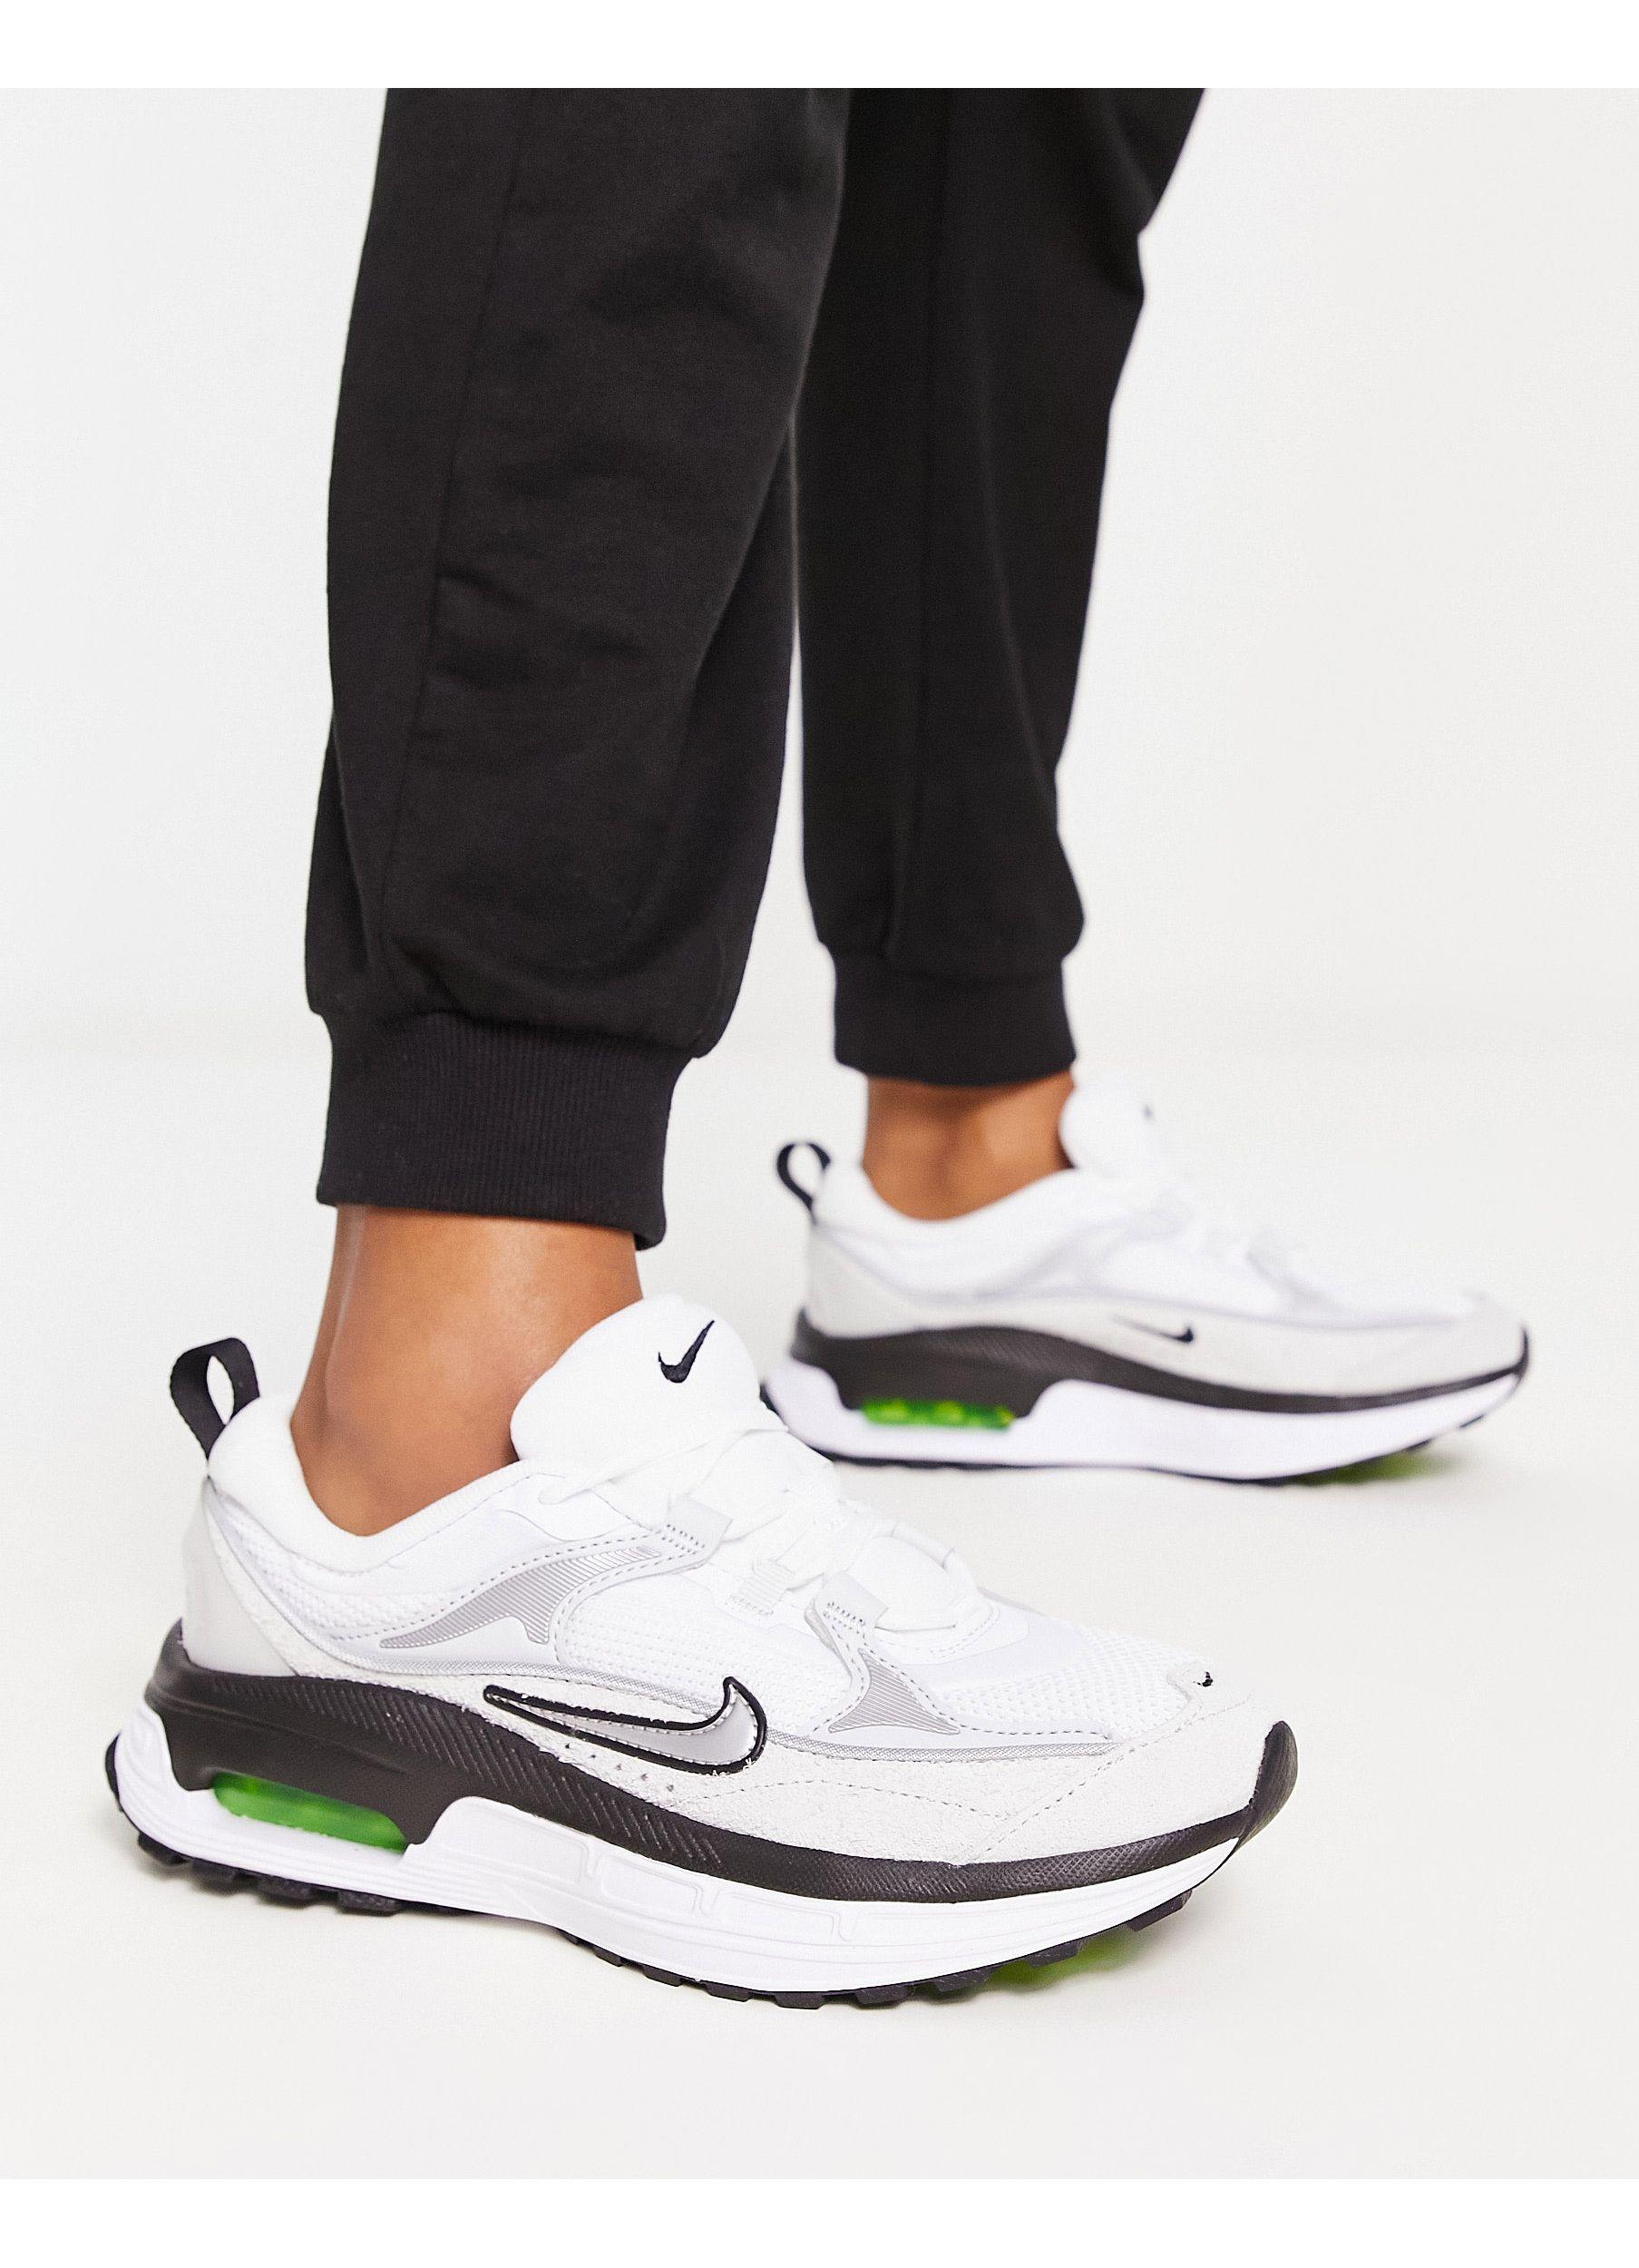 Nike Air Max Bliss in | Lyst